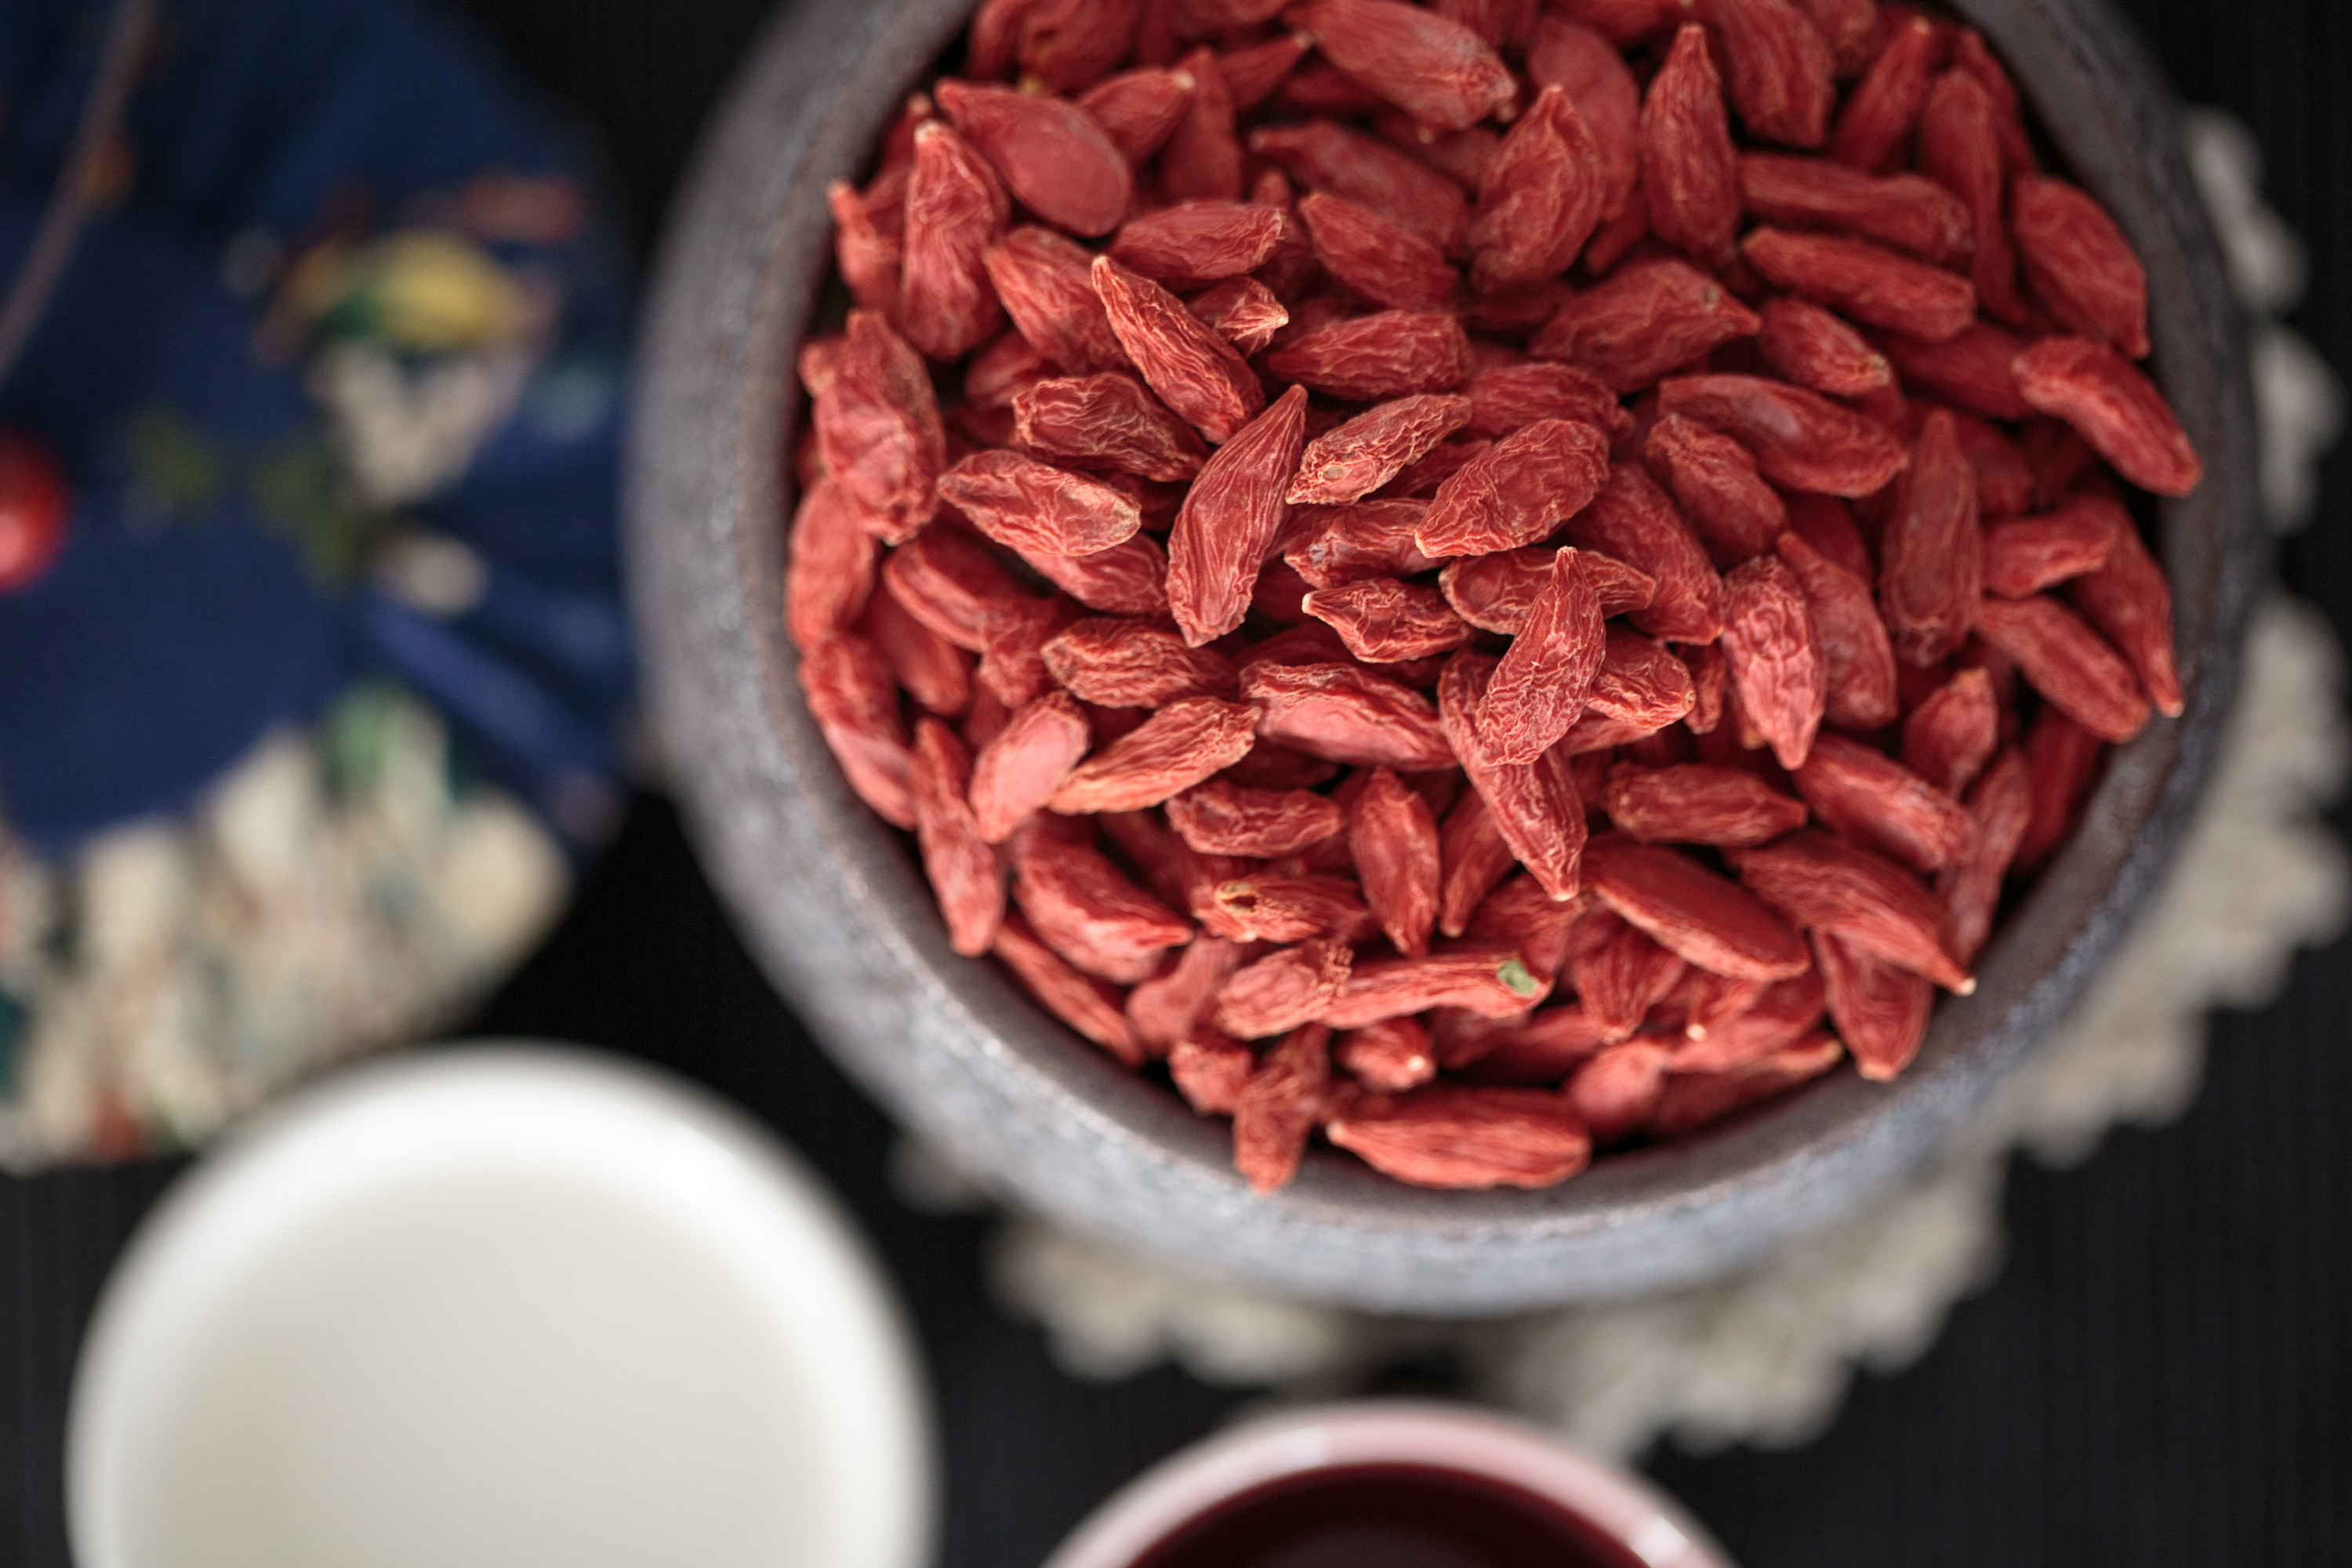 Dried goji berries are considered a superfood. Photo: Shutterstock